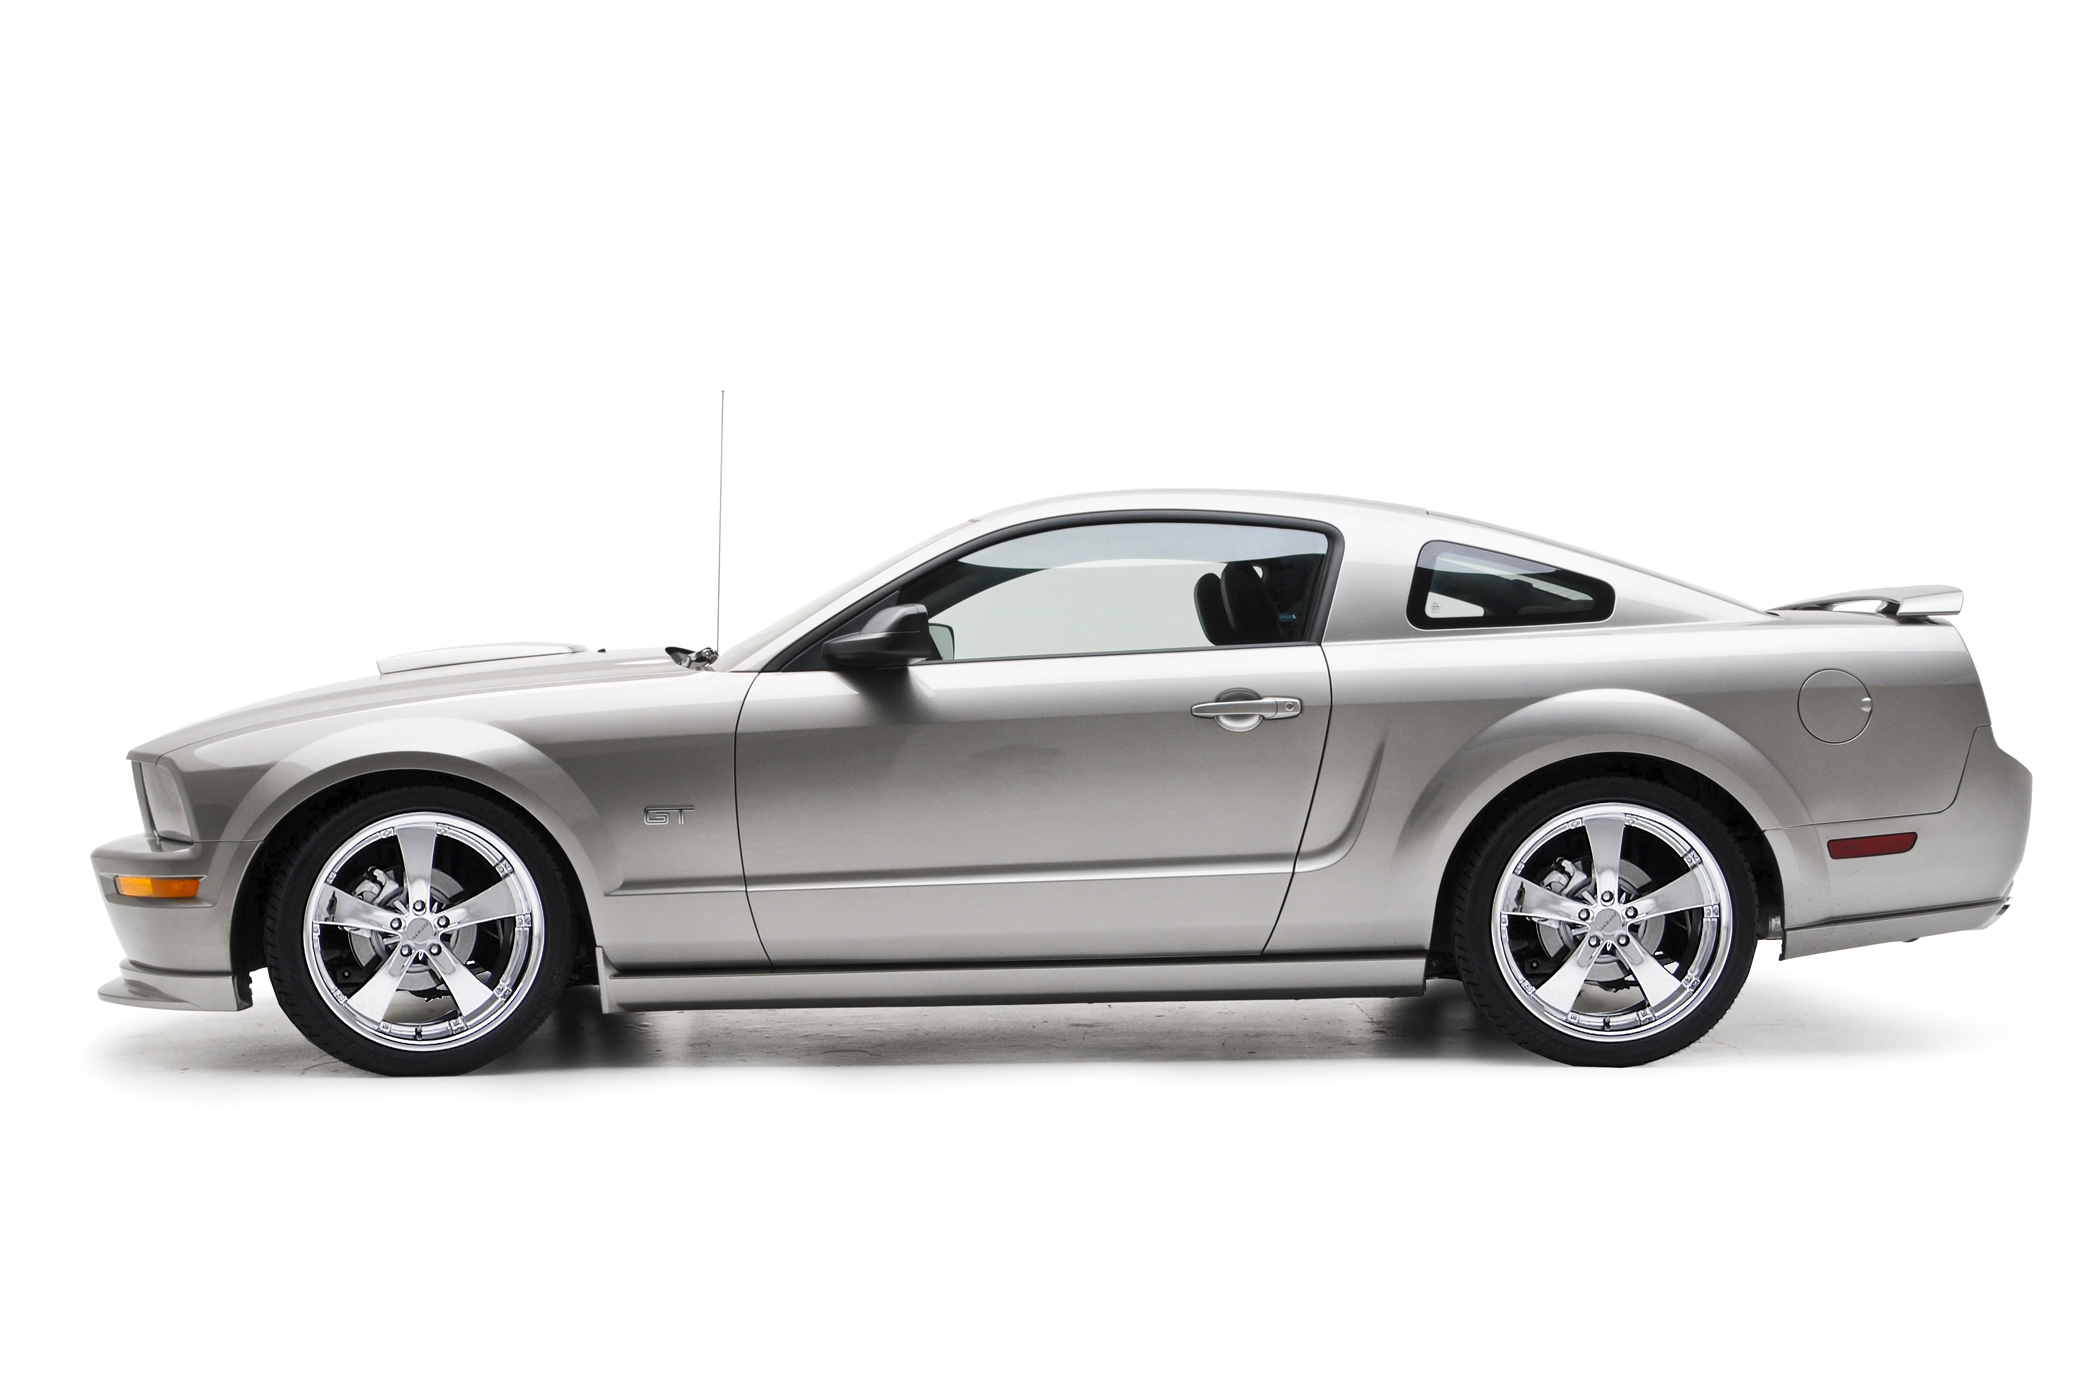 3dCarbon GT Styling Body Kit for 2005-09 Mustang